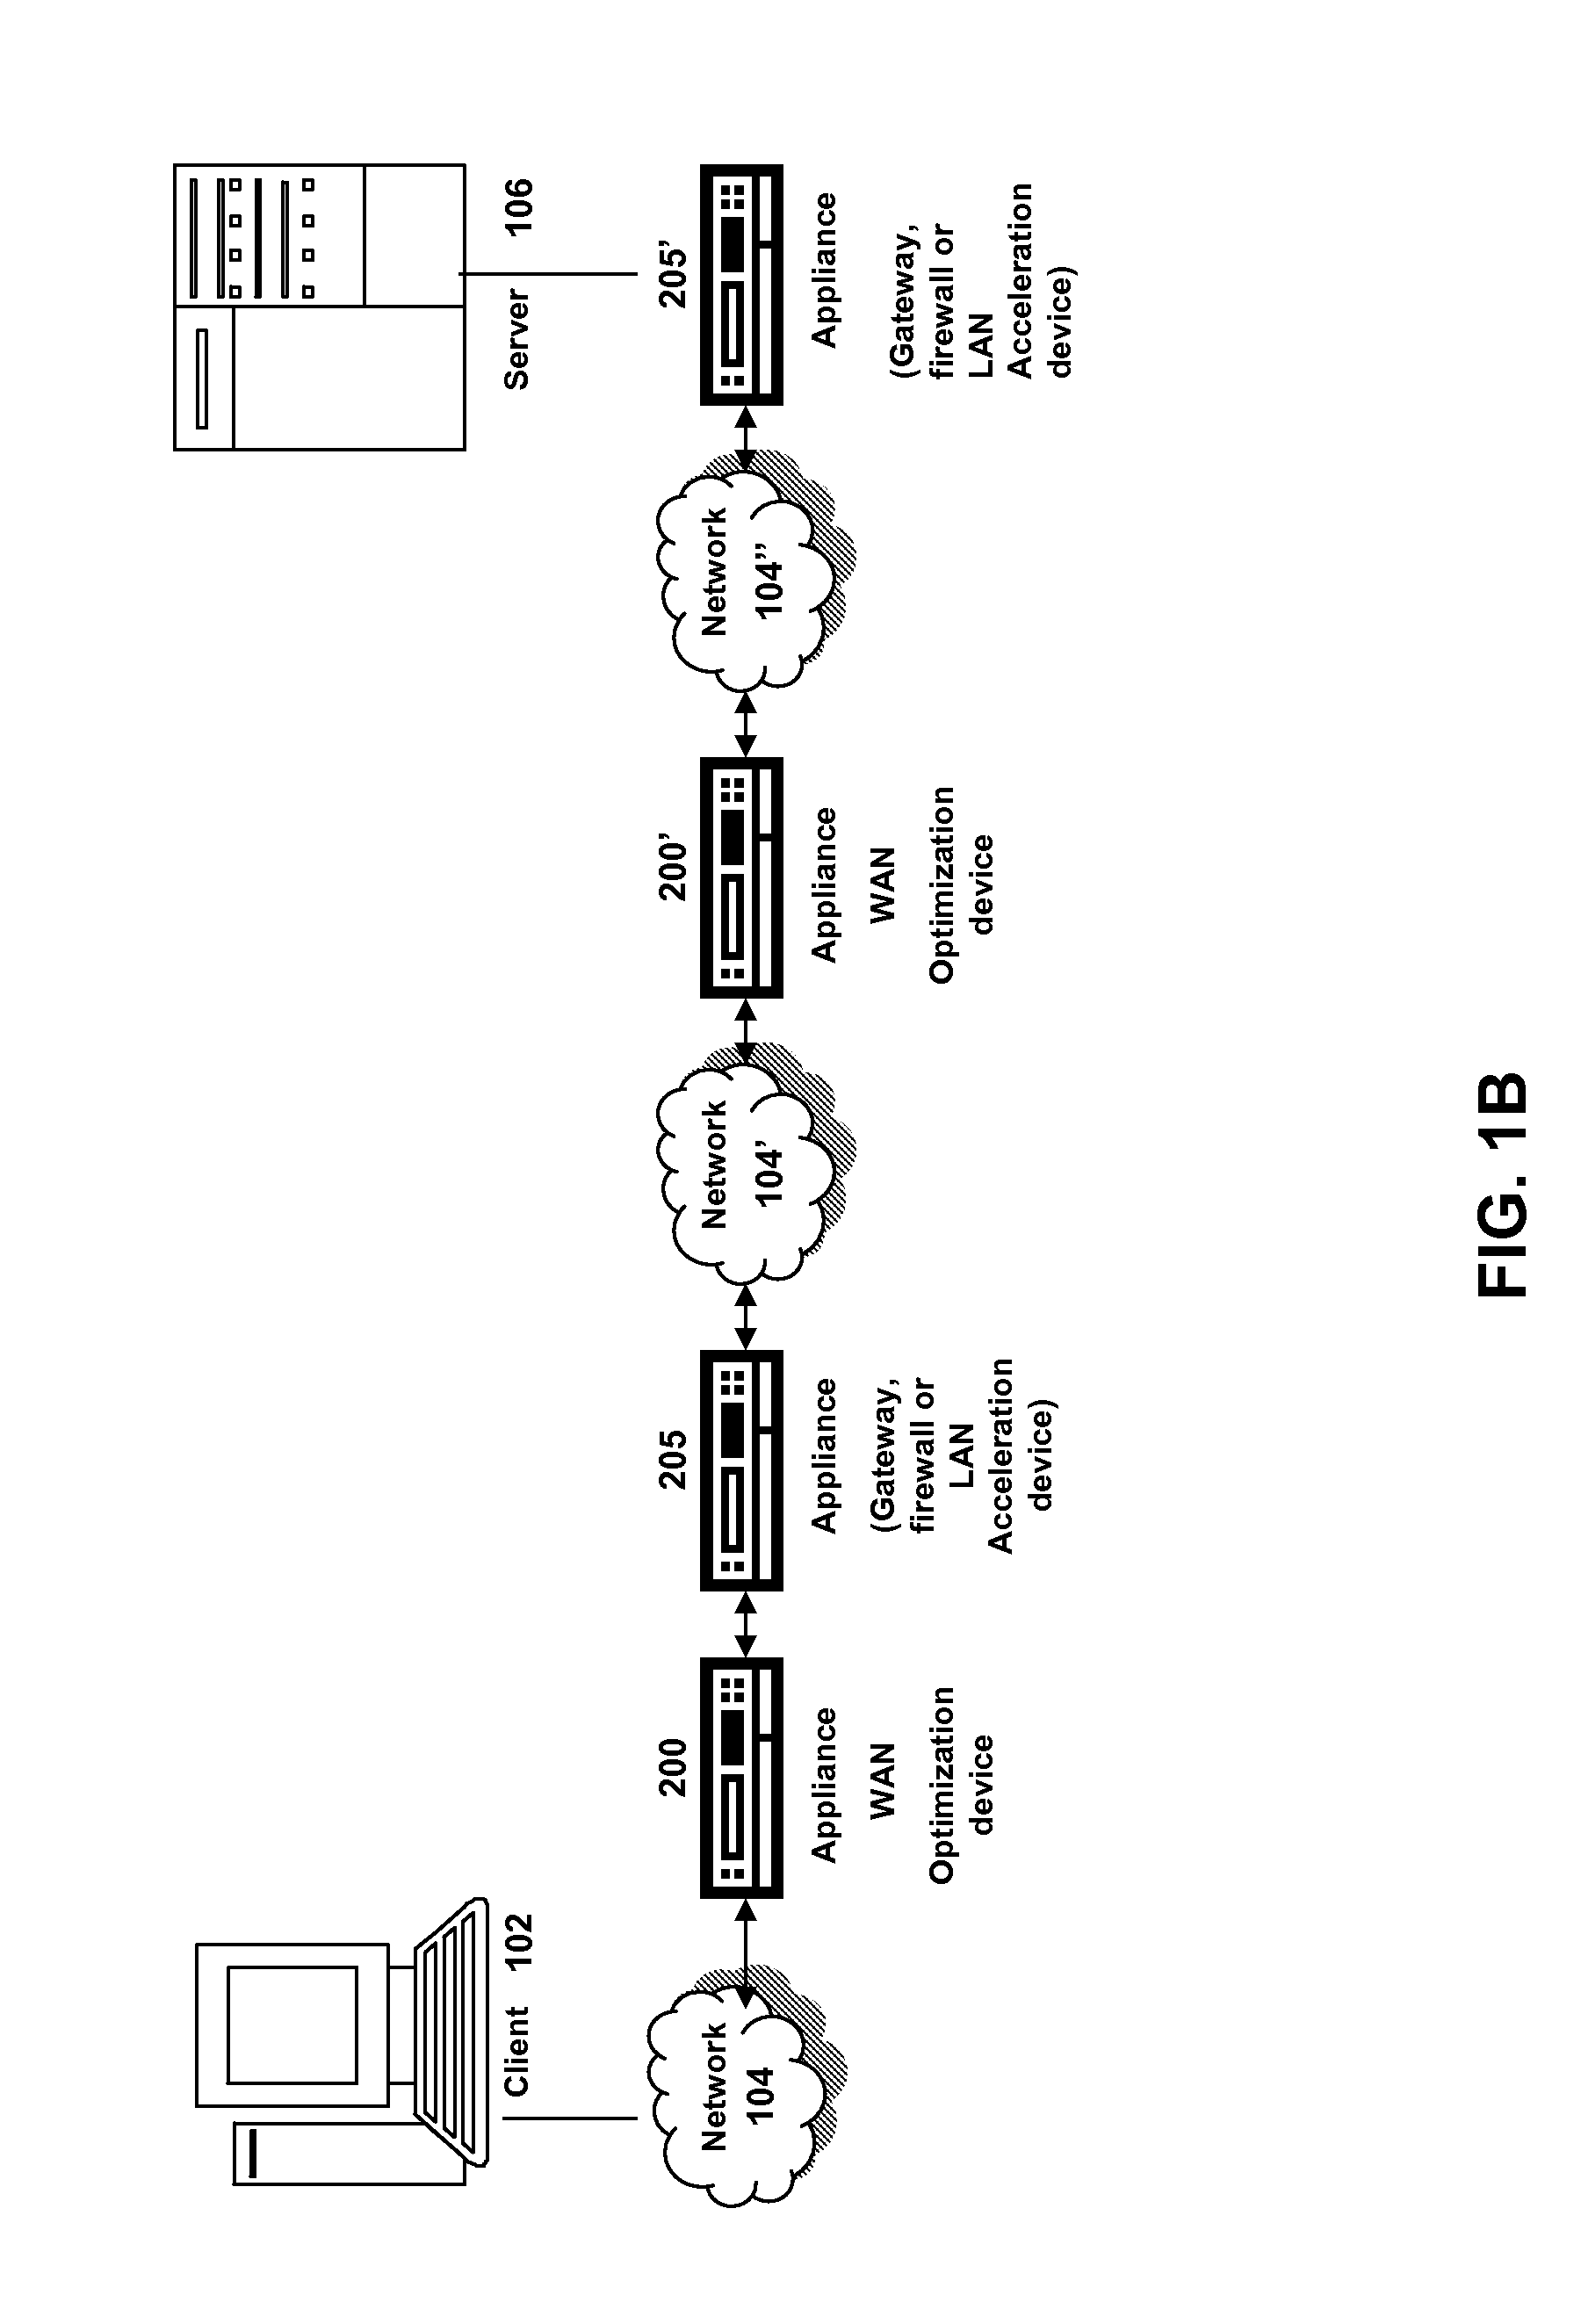 Systems and methods of dynamically checking freshness of cached objects based on link status